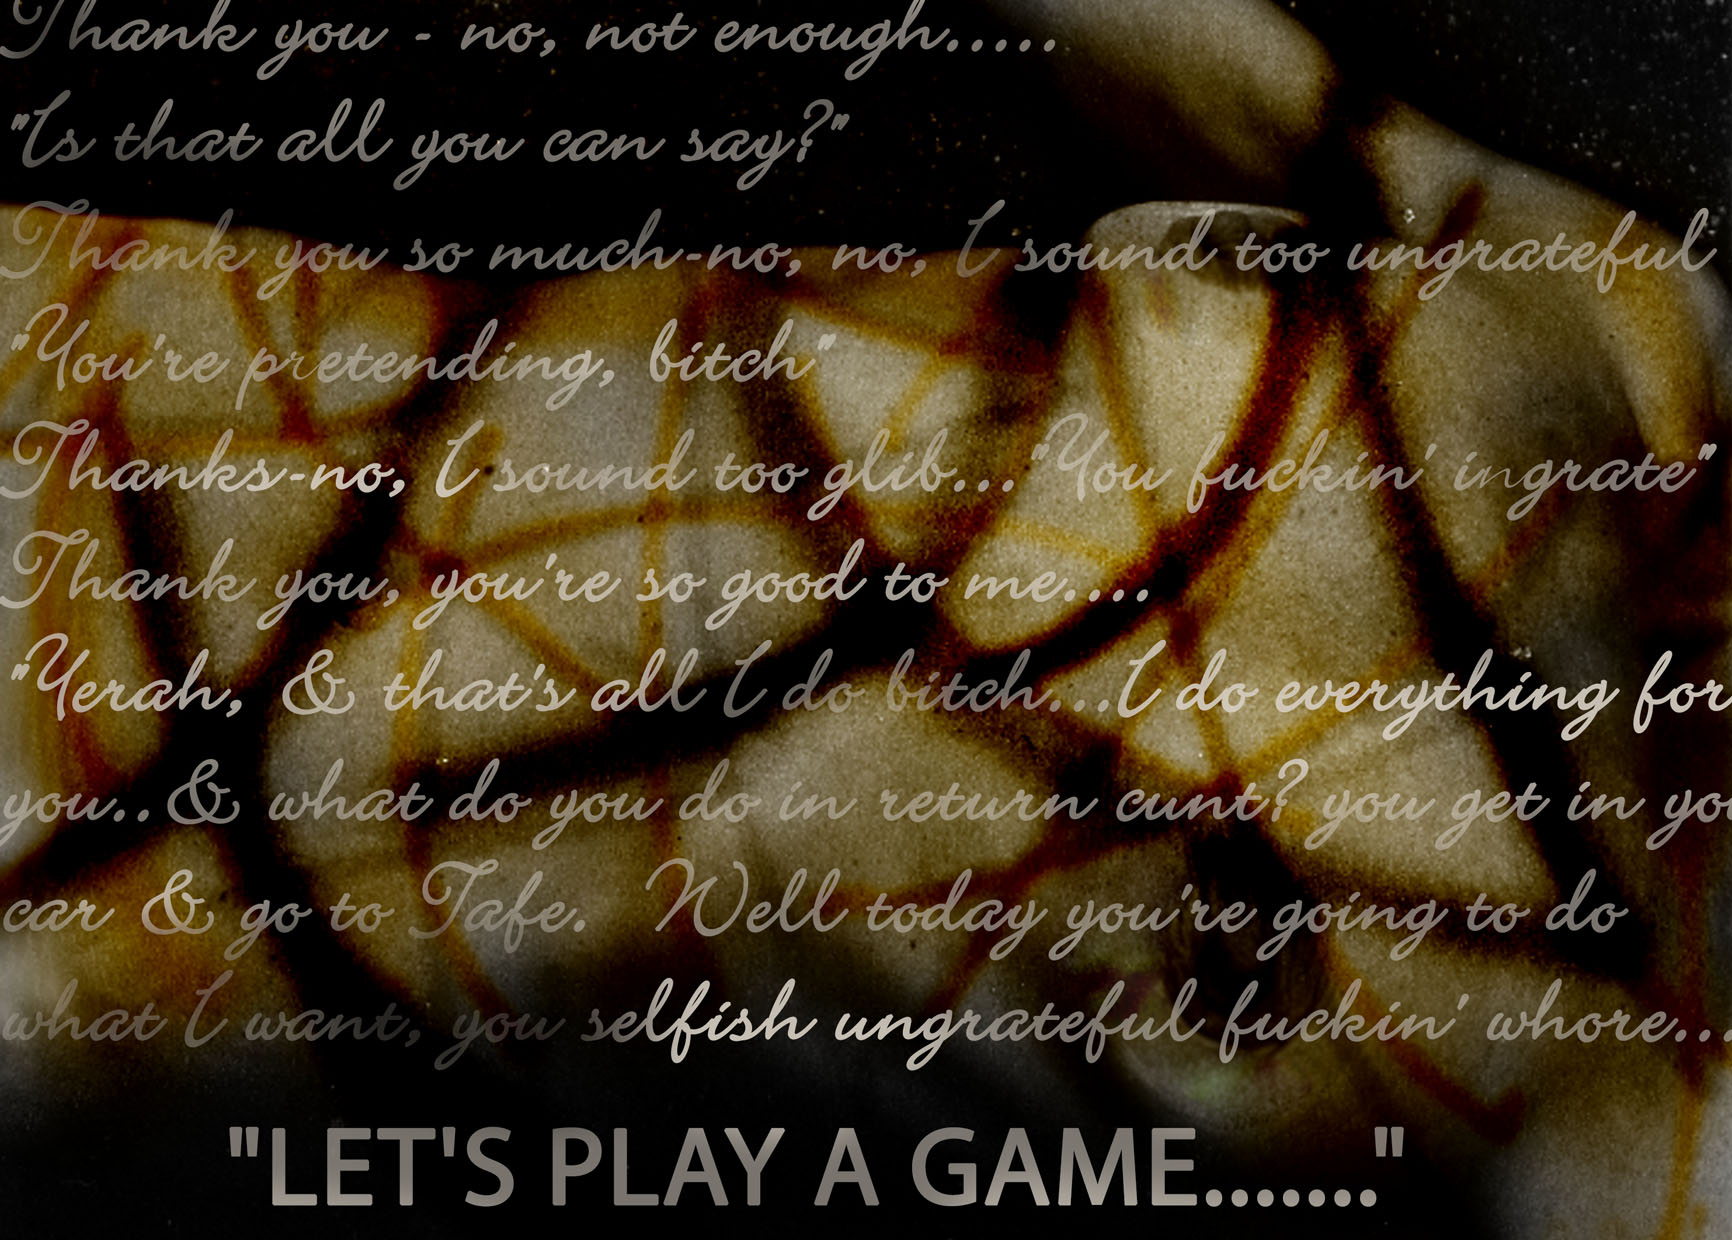 Lets Play A Game...digital image exploring domestic violence against women and its composite abusive judicial system